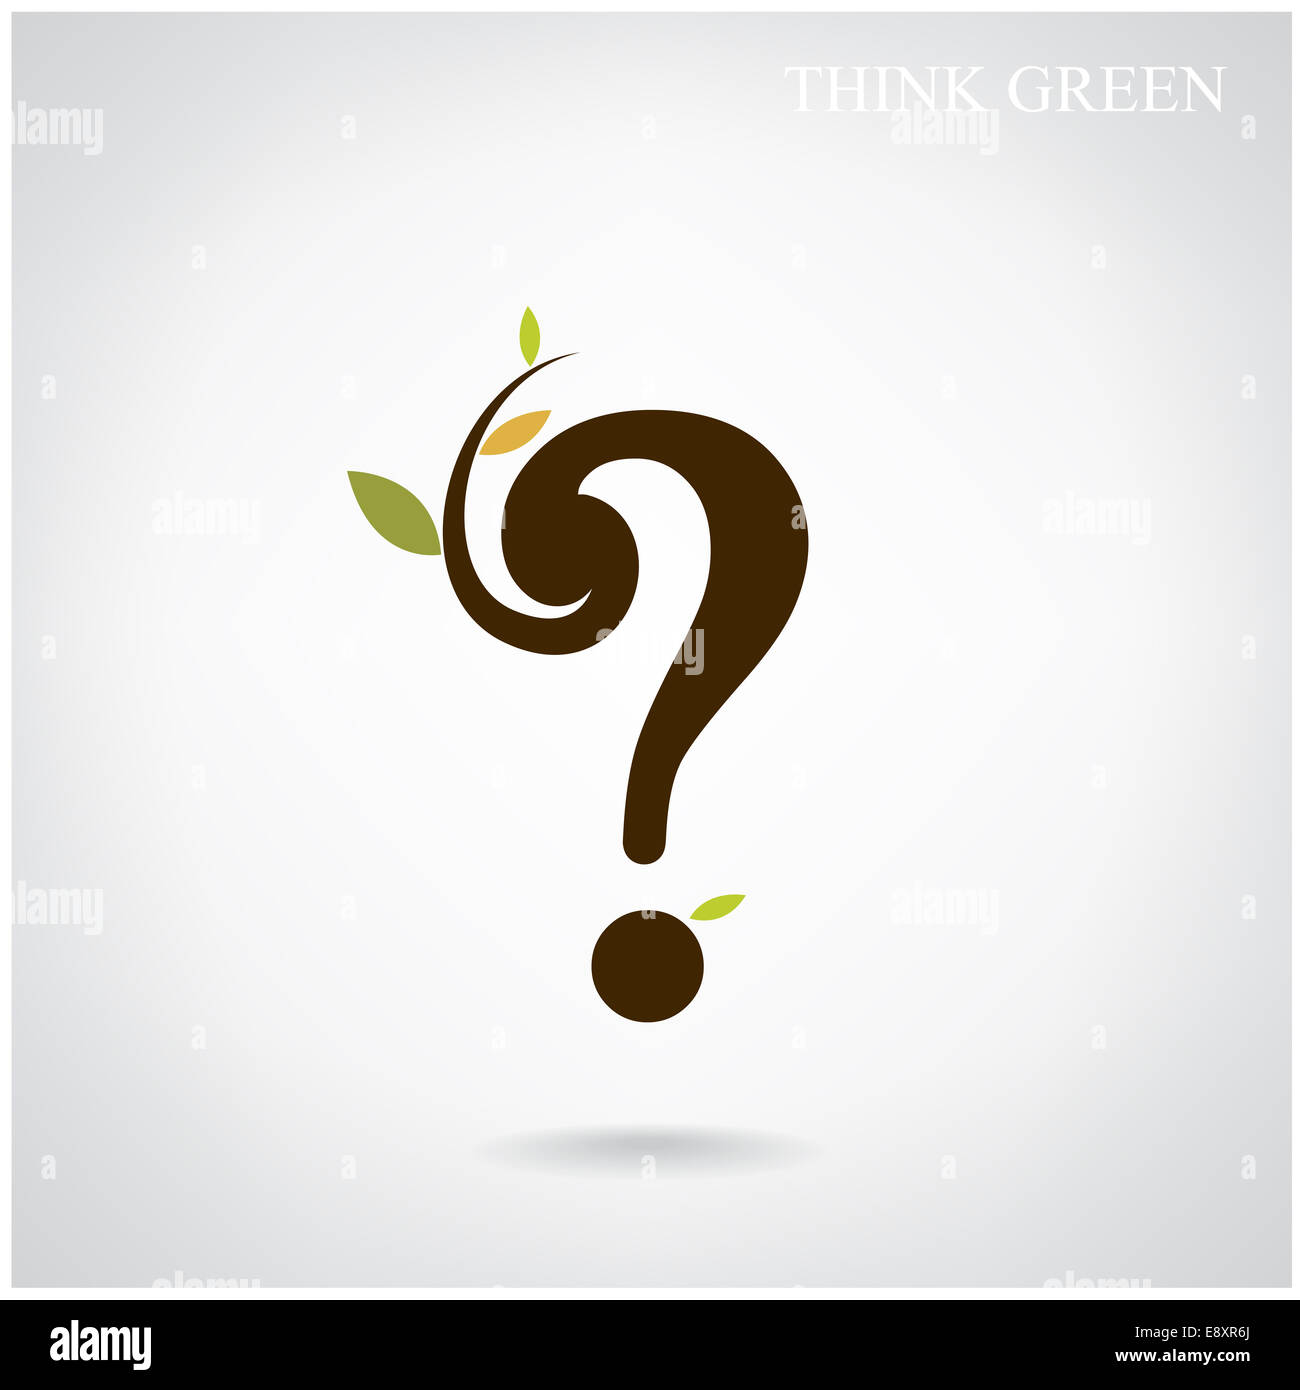 Question mark and think green concept. Stock Photo